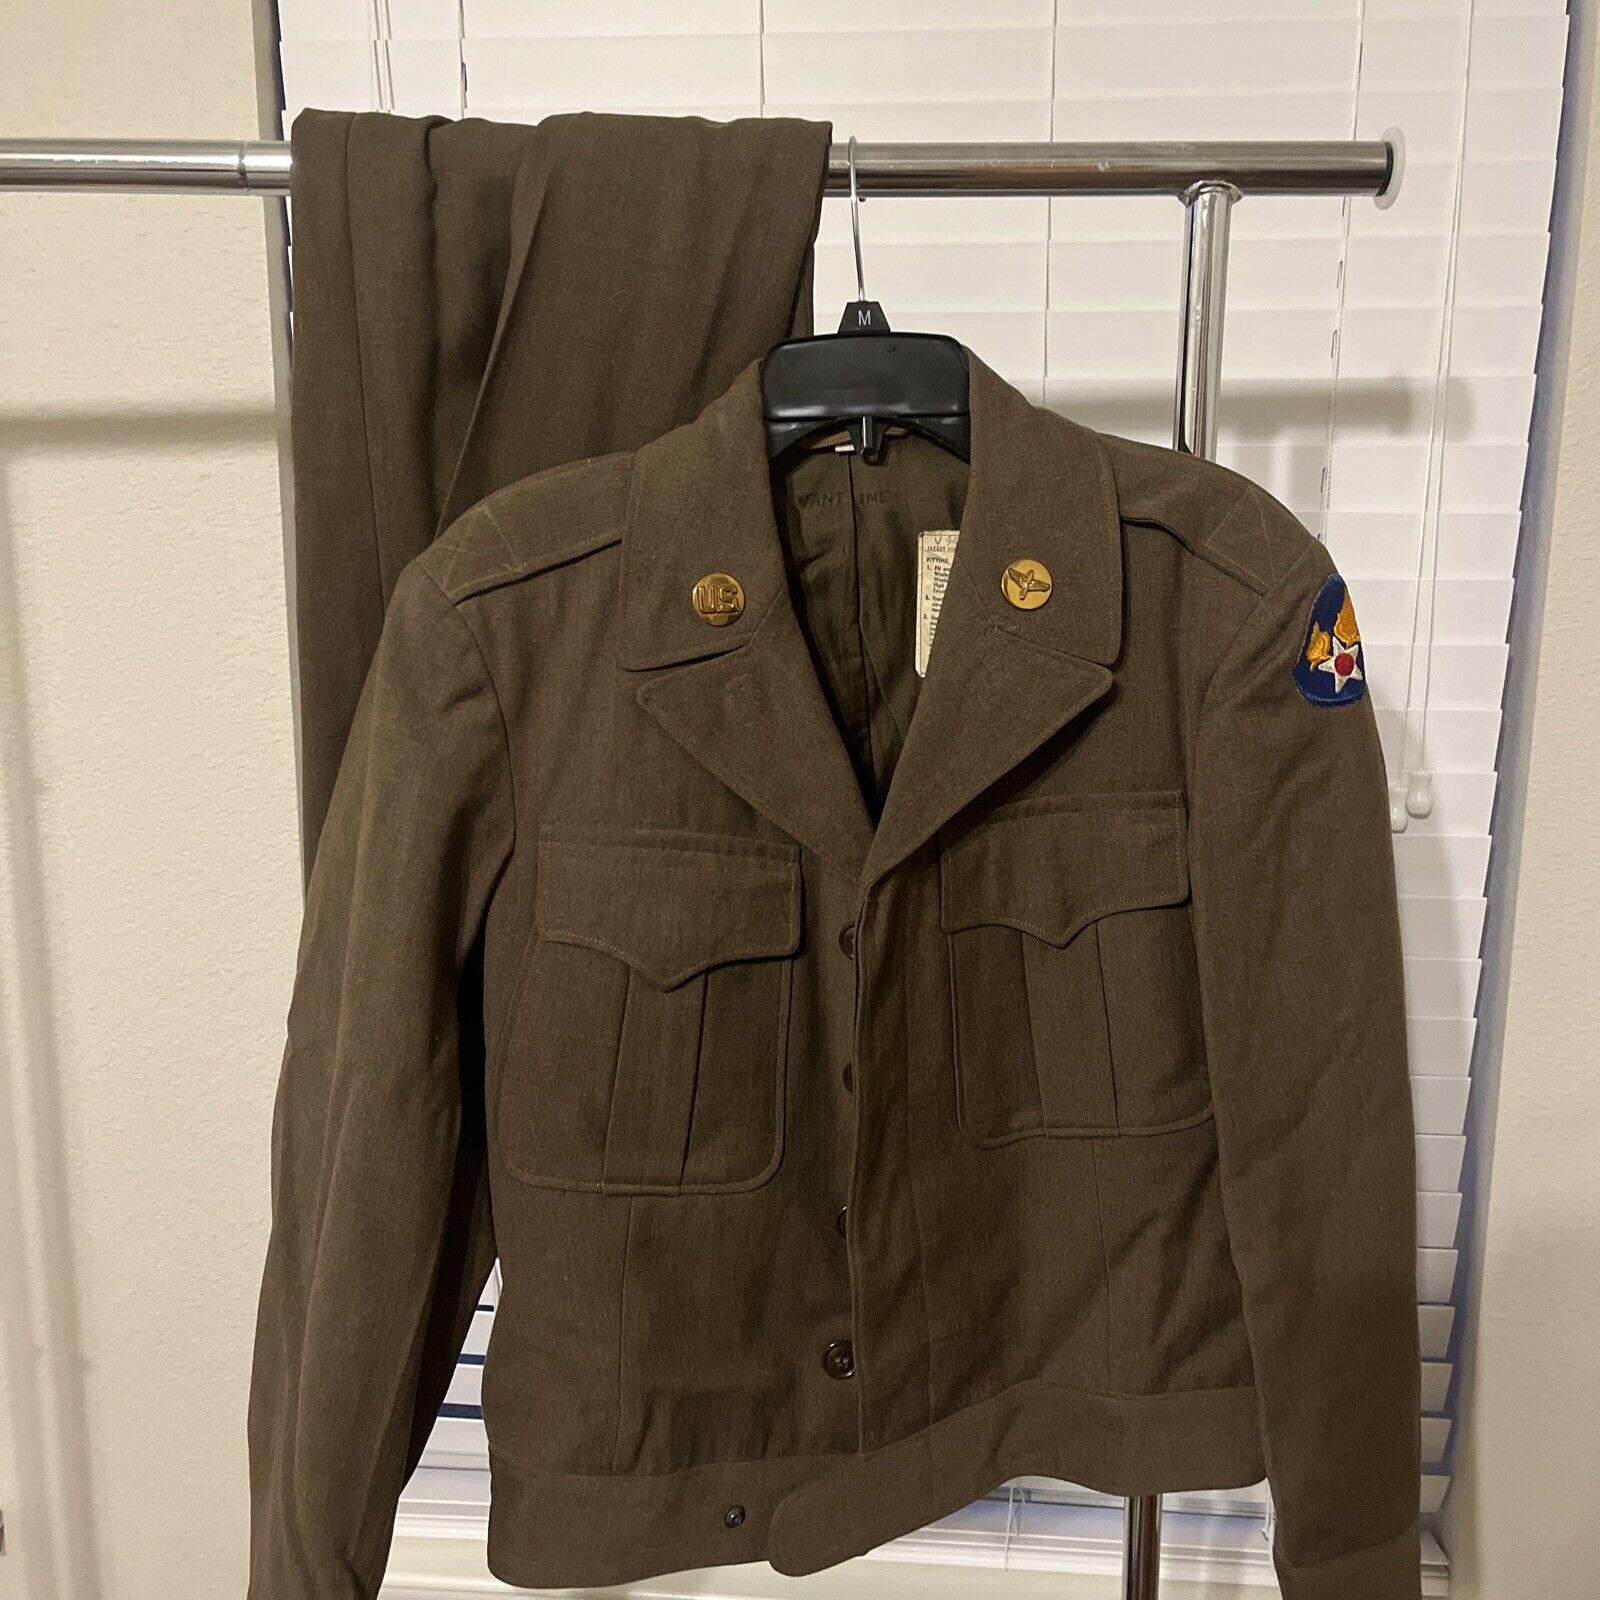 Post WWII Ike Jacket and Trousers